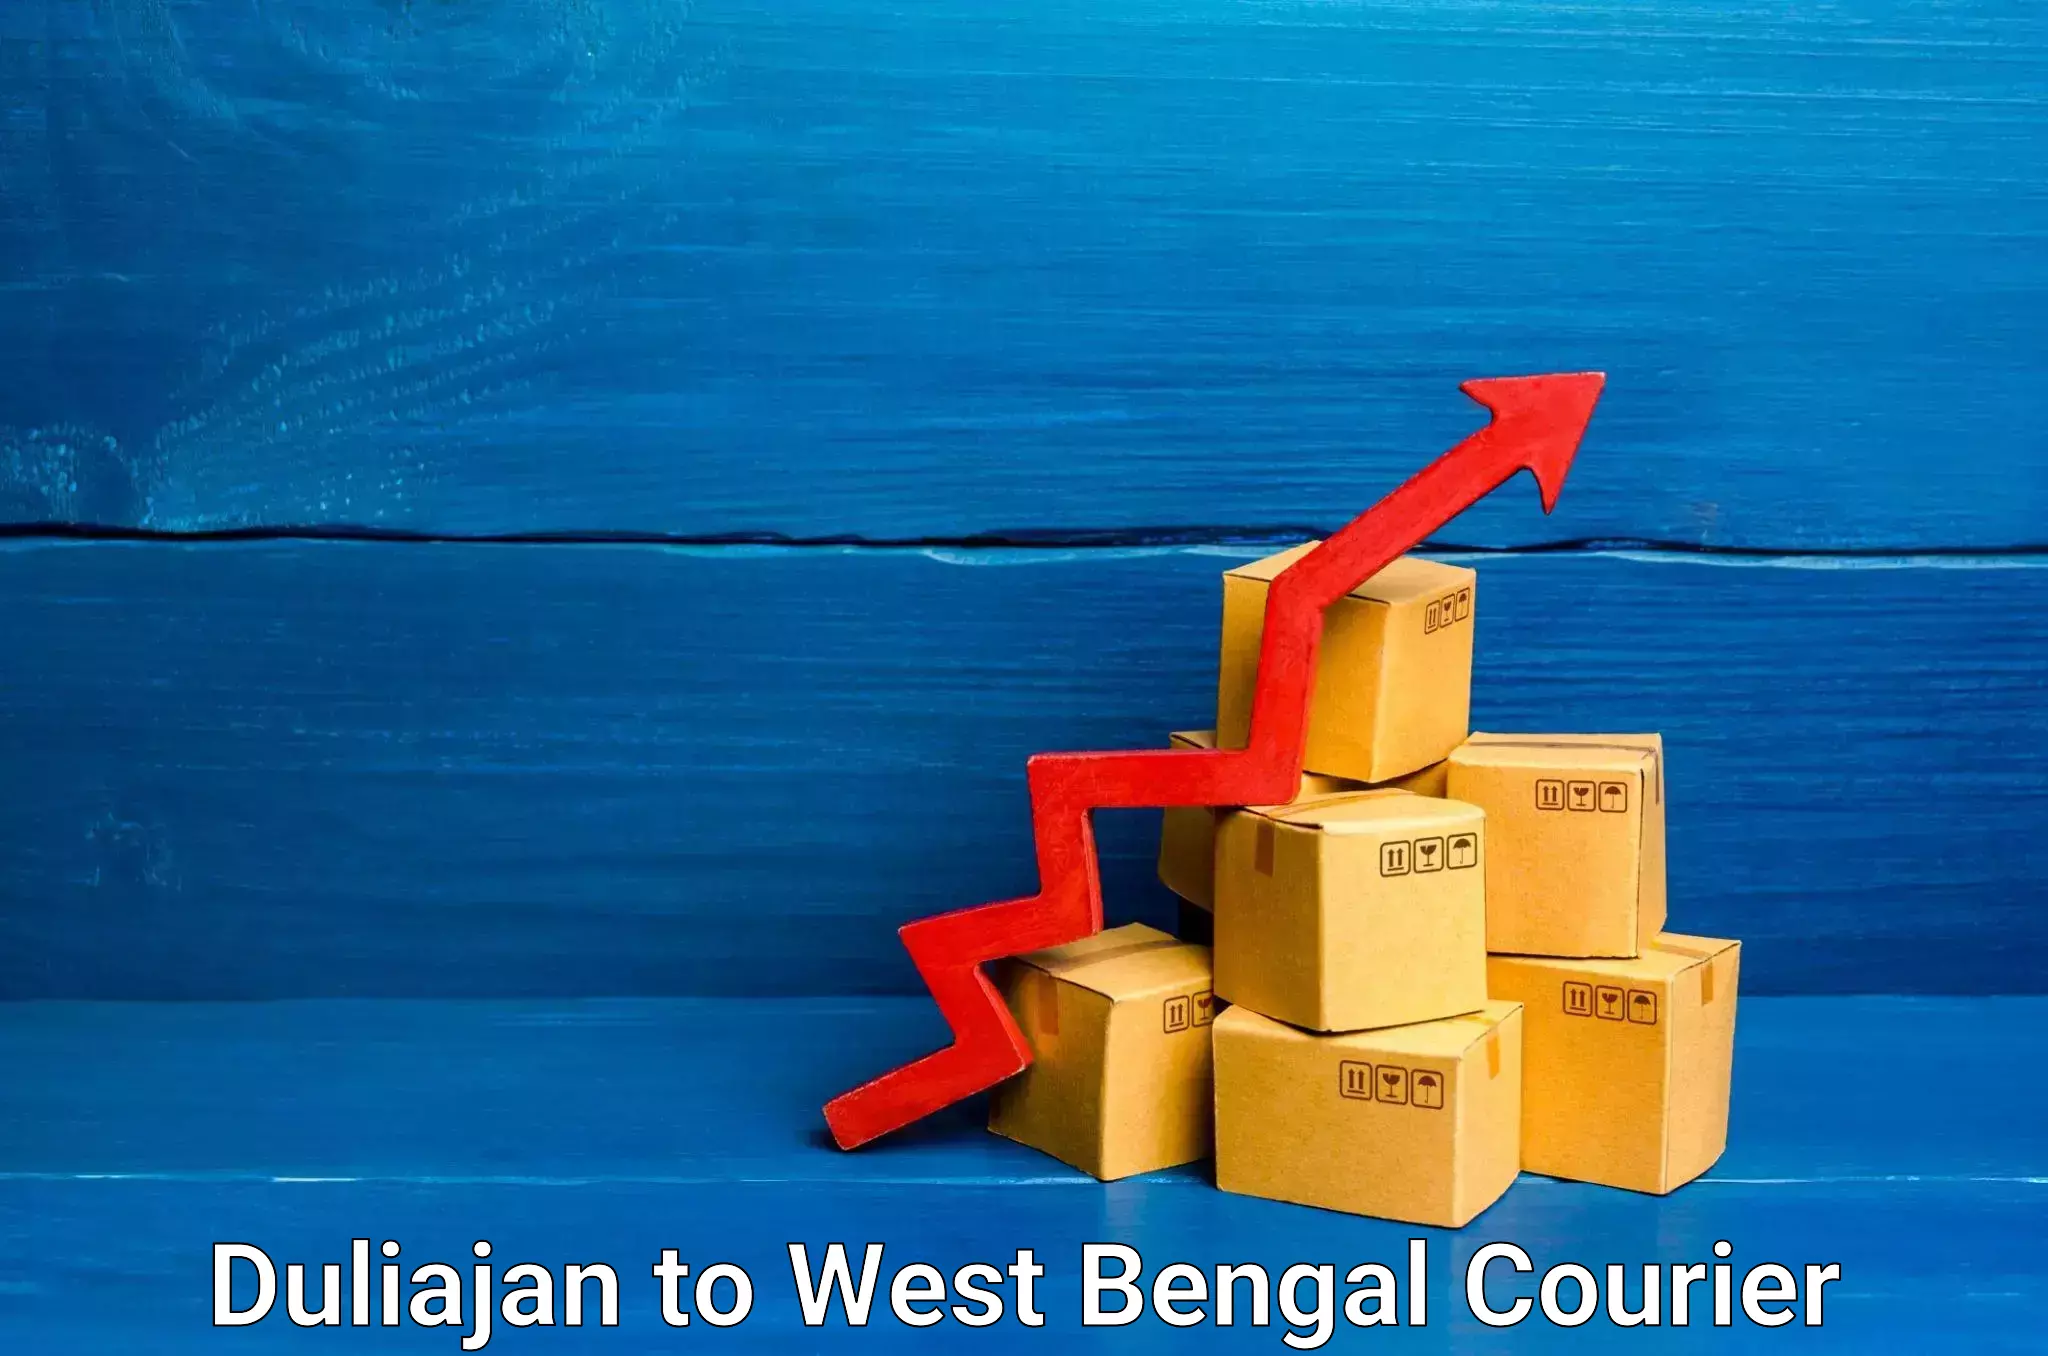 Reliable parcel services Duliajan to Bagdogra